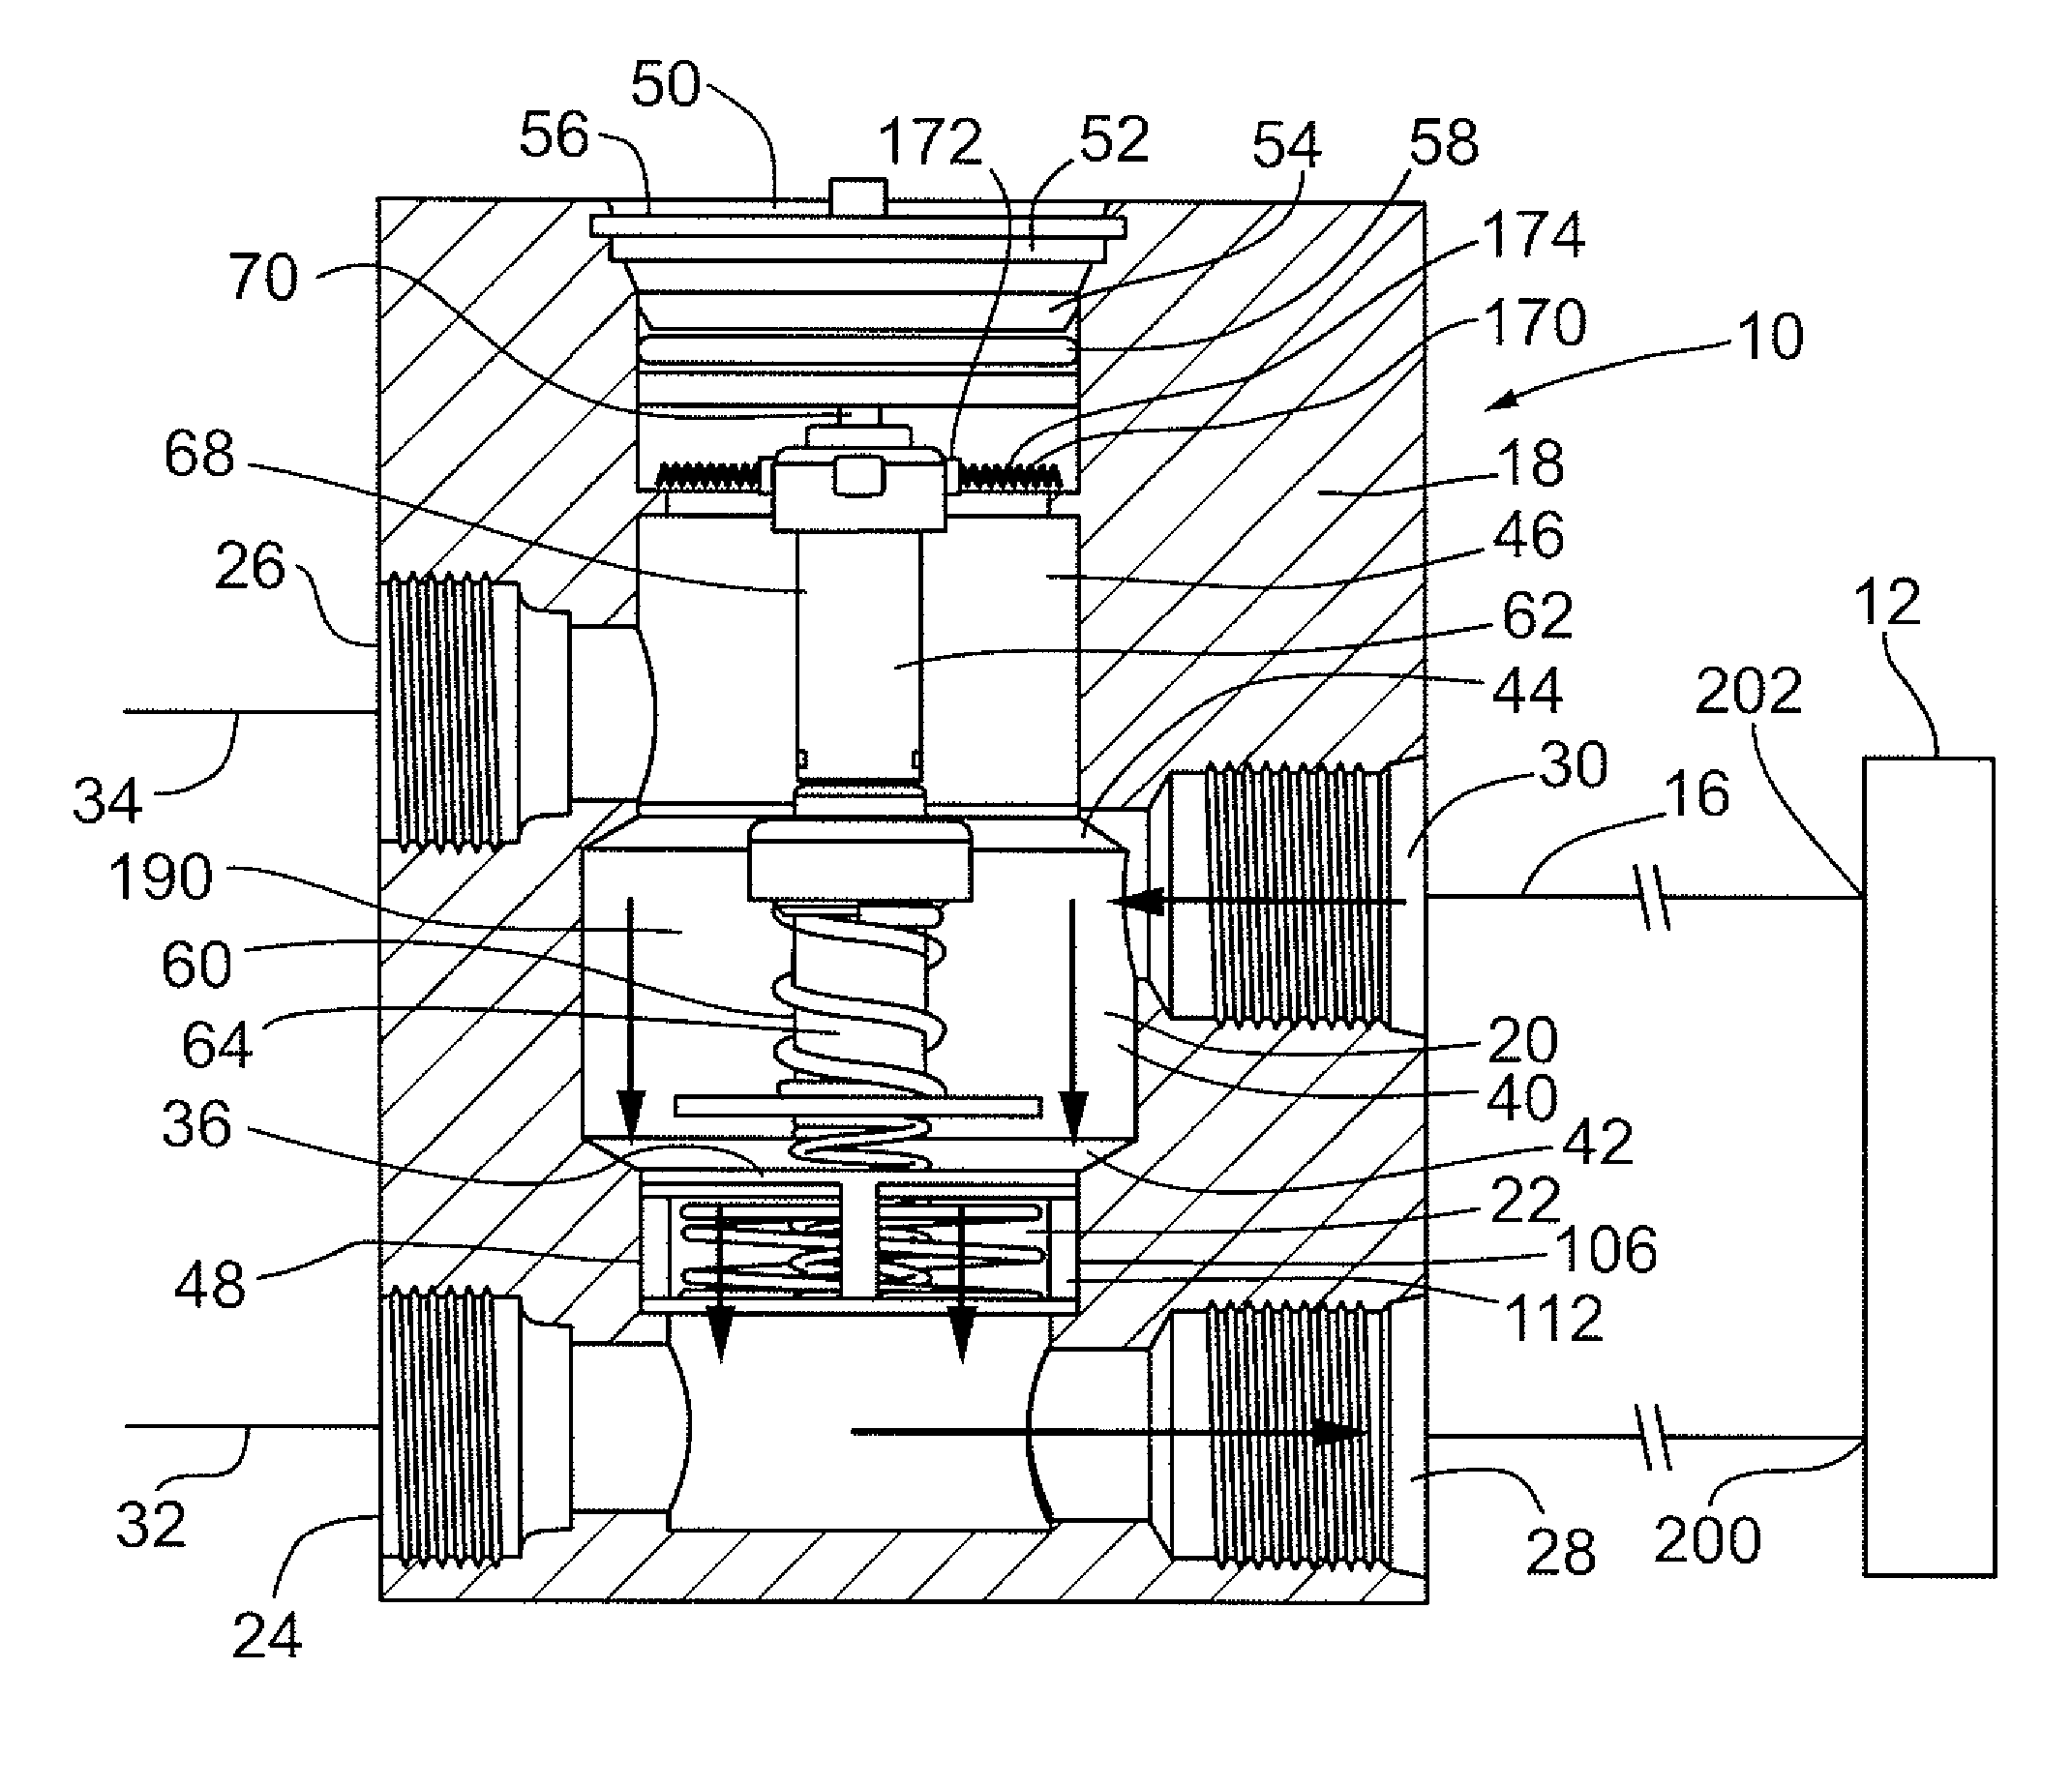 Failsafe thermal bypass valve for cooling system